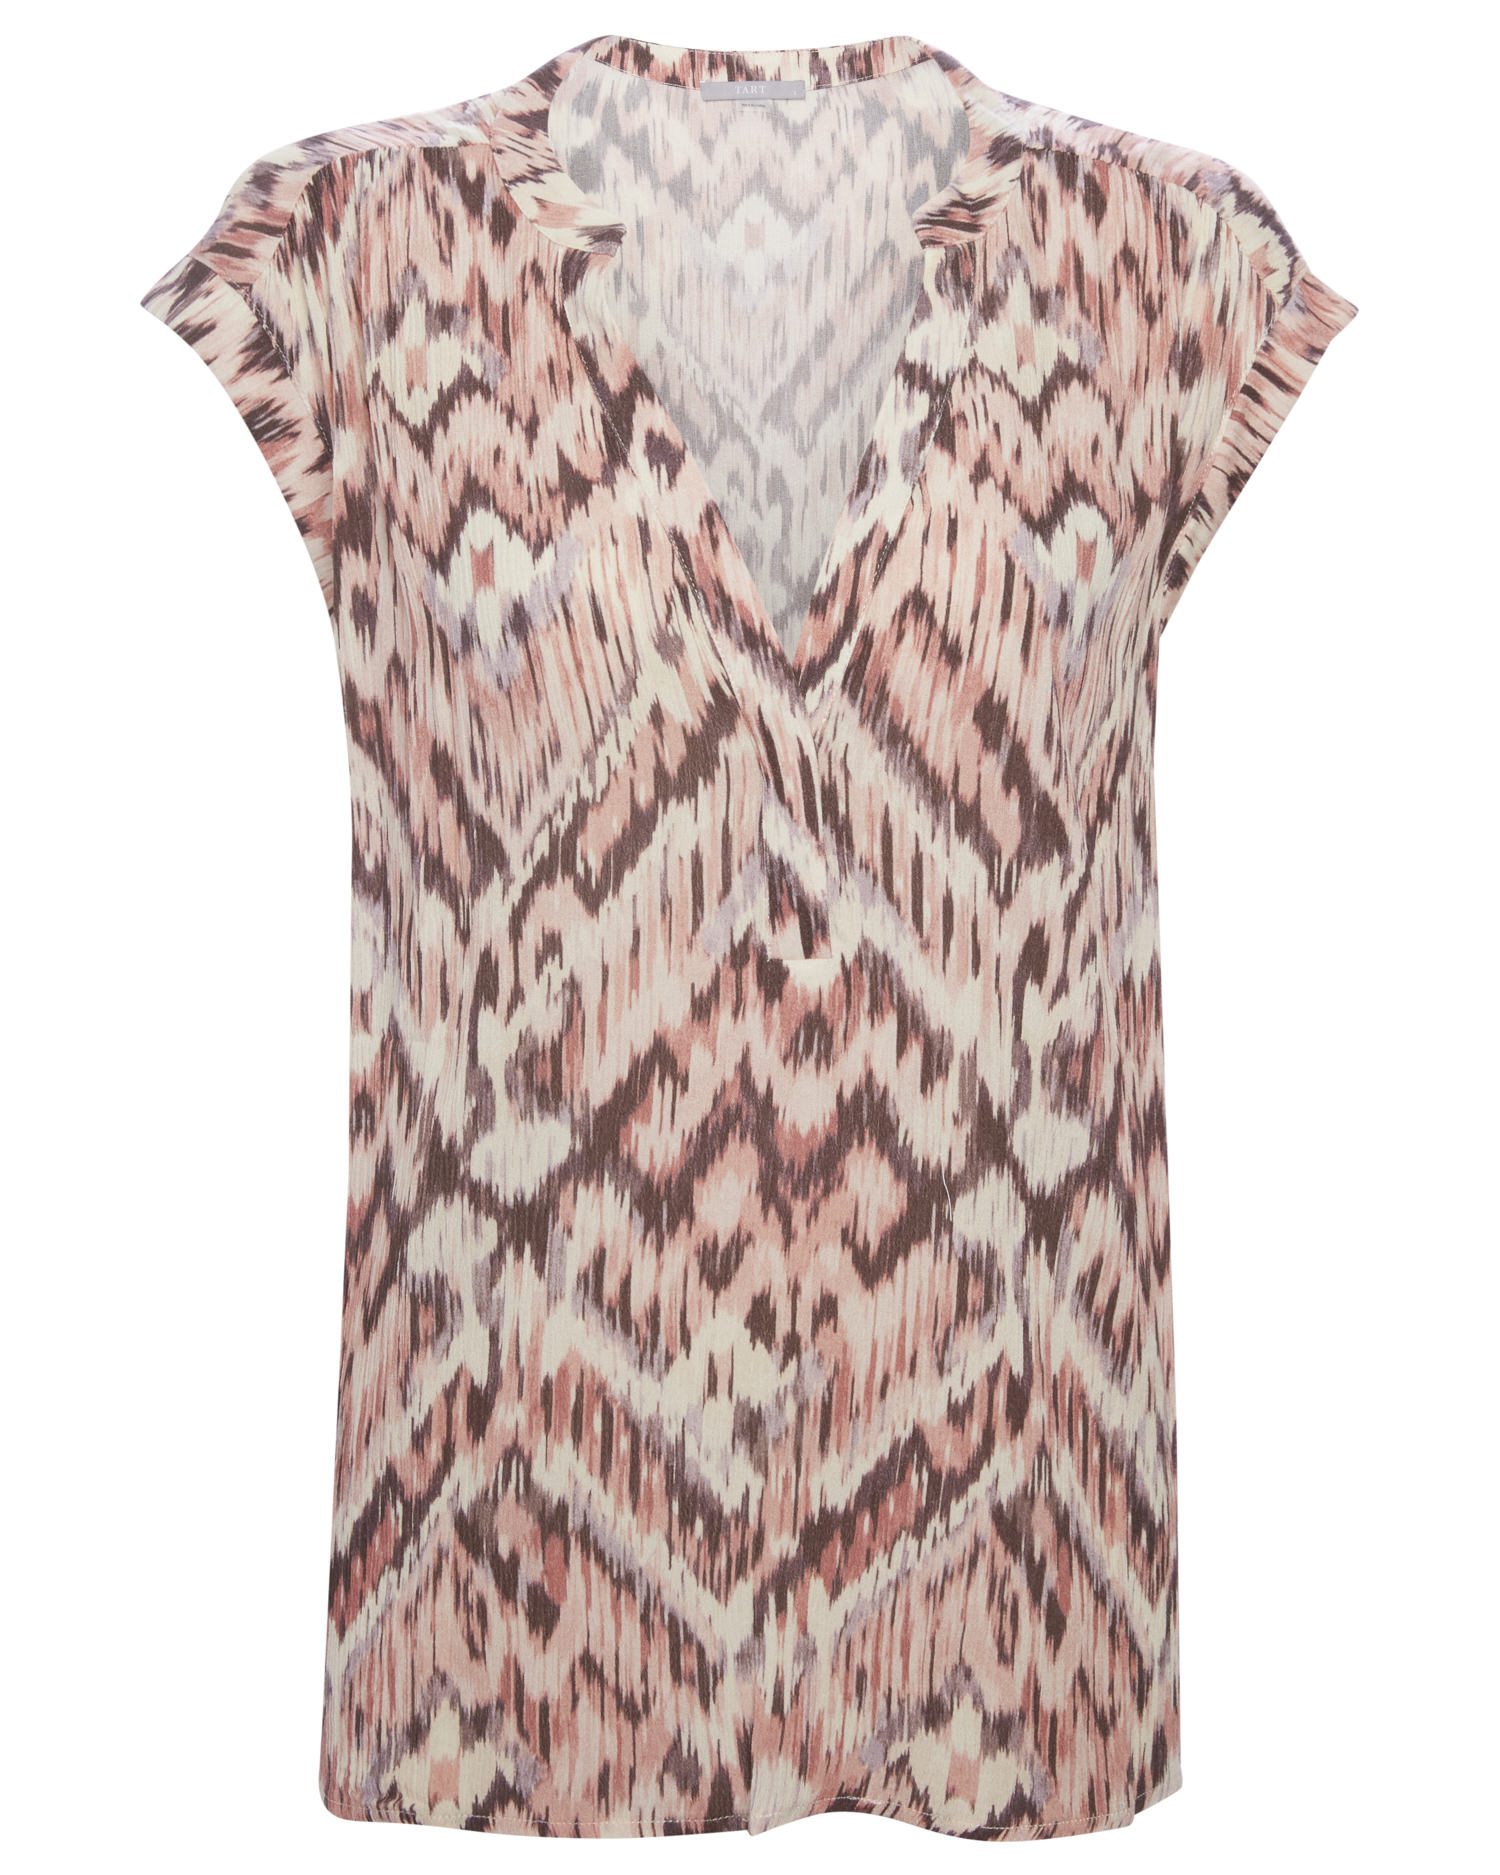 Tart Collections Abstract Chevron Print Top